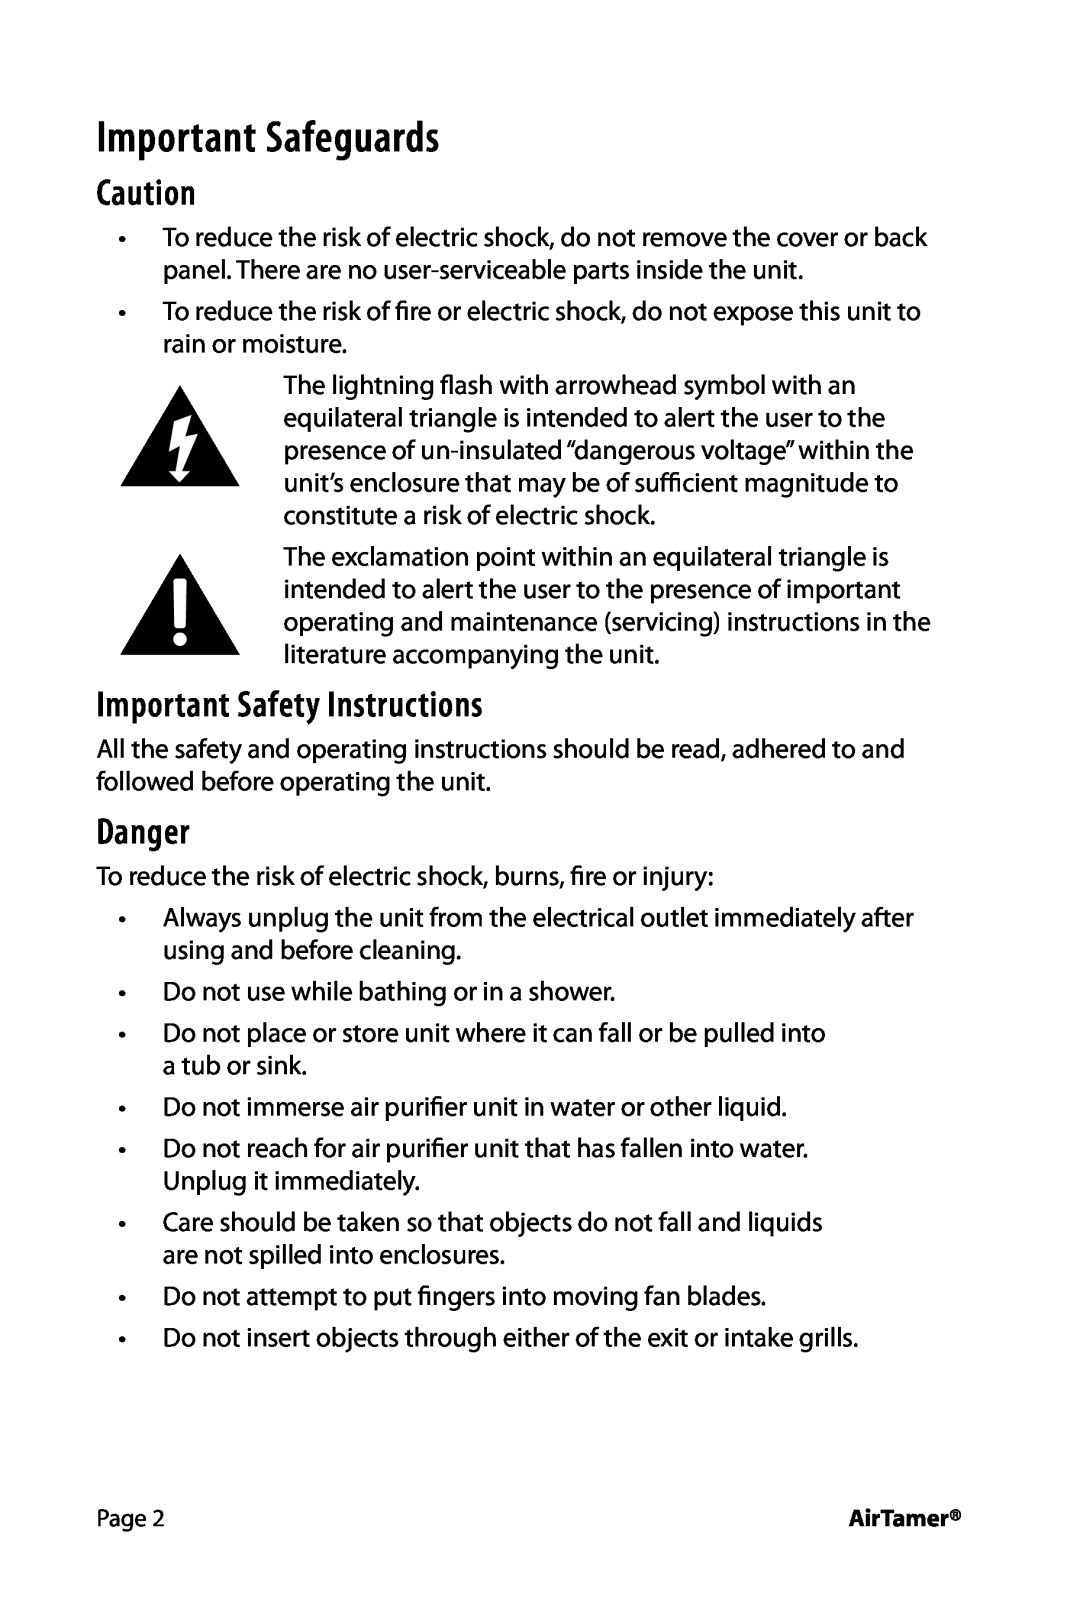 FilterStream A600 instruction manual Important Safeguards, Important Safety Instructions, Danger 